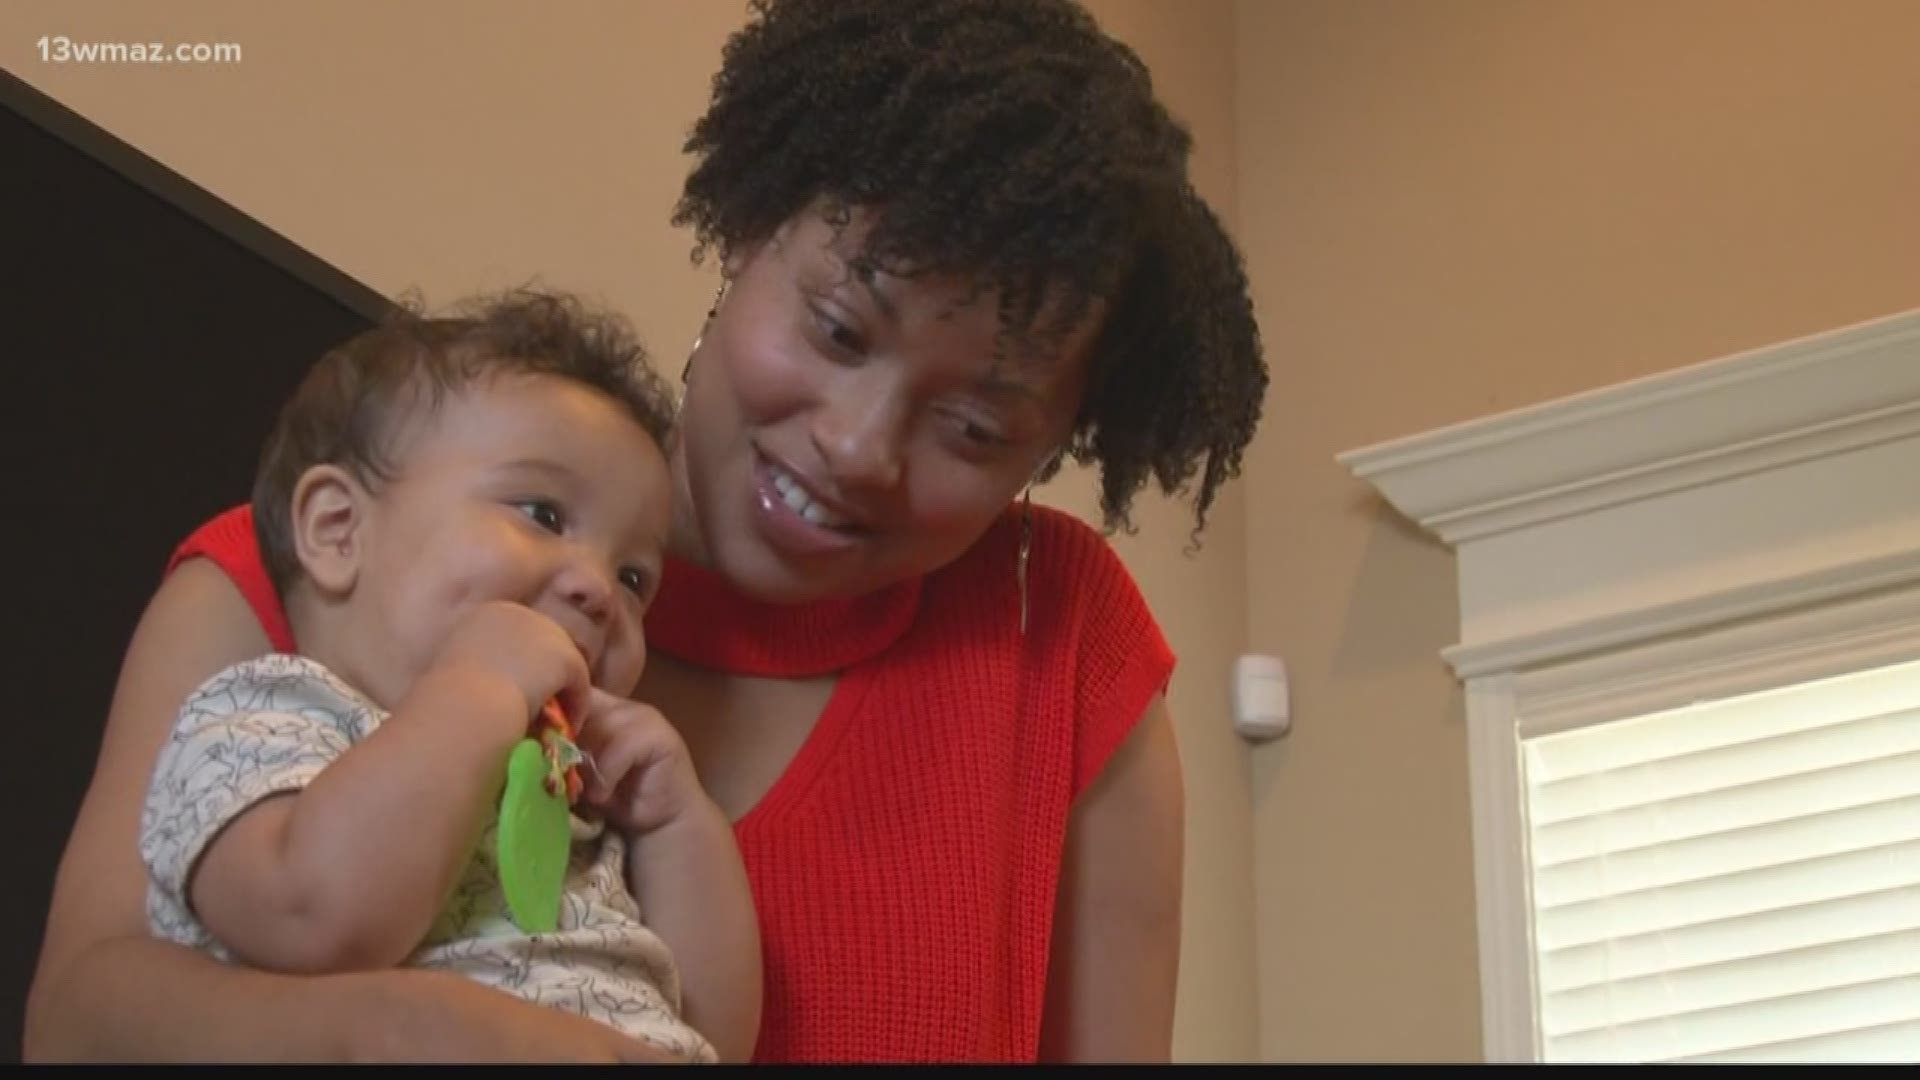 Mothers Matter: Doulas help with delivery